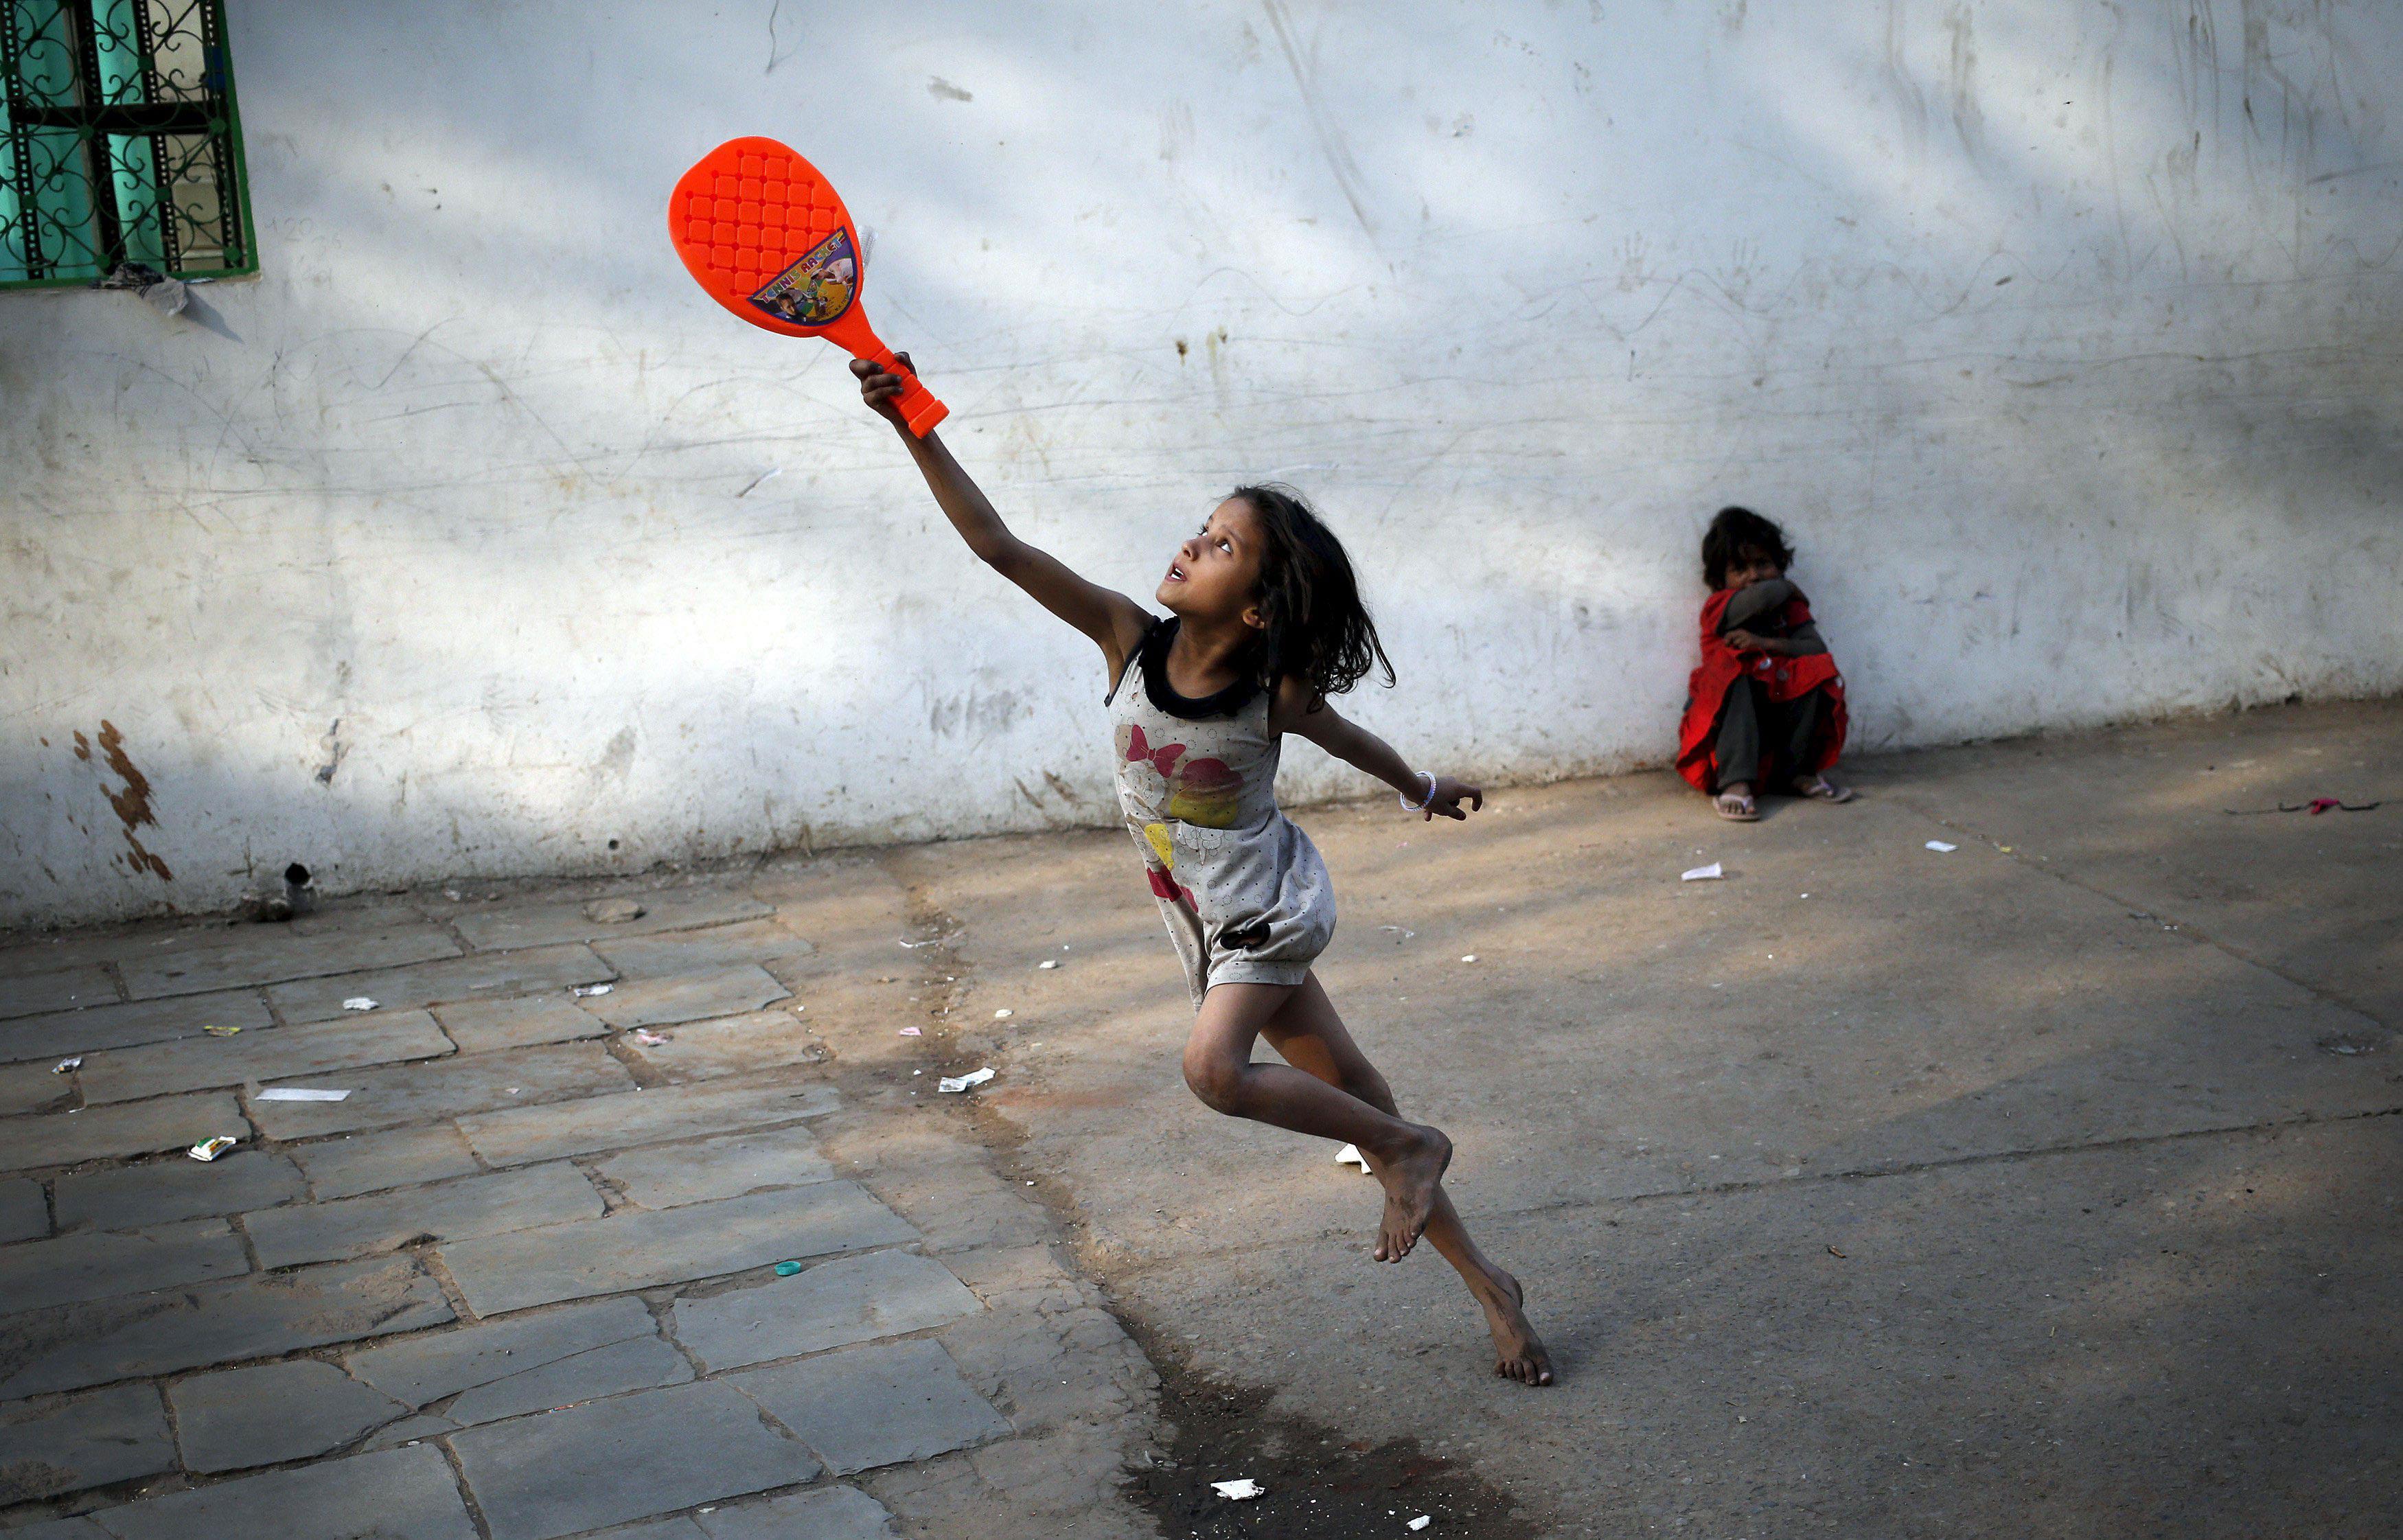 A child plays with a plastic badminton racket in the old quarters of Delhi